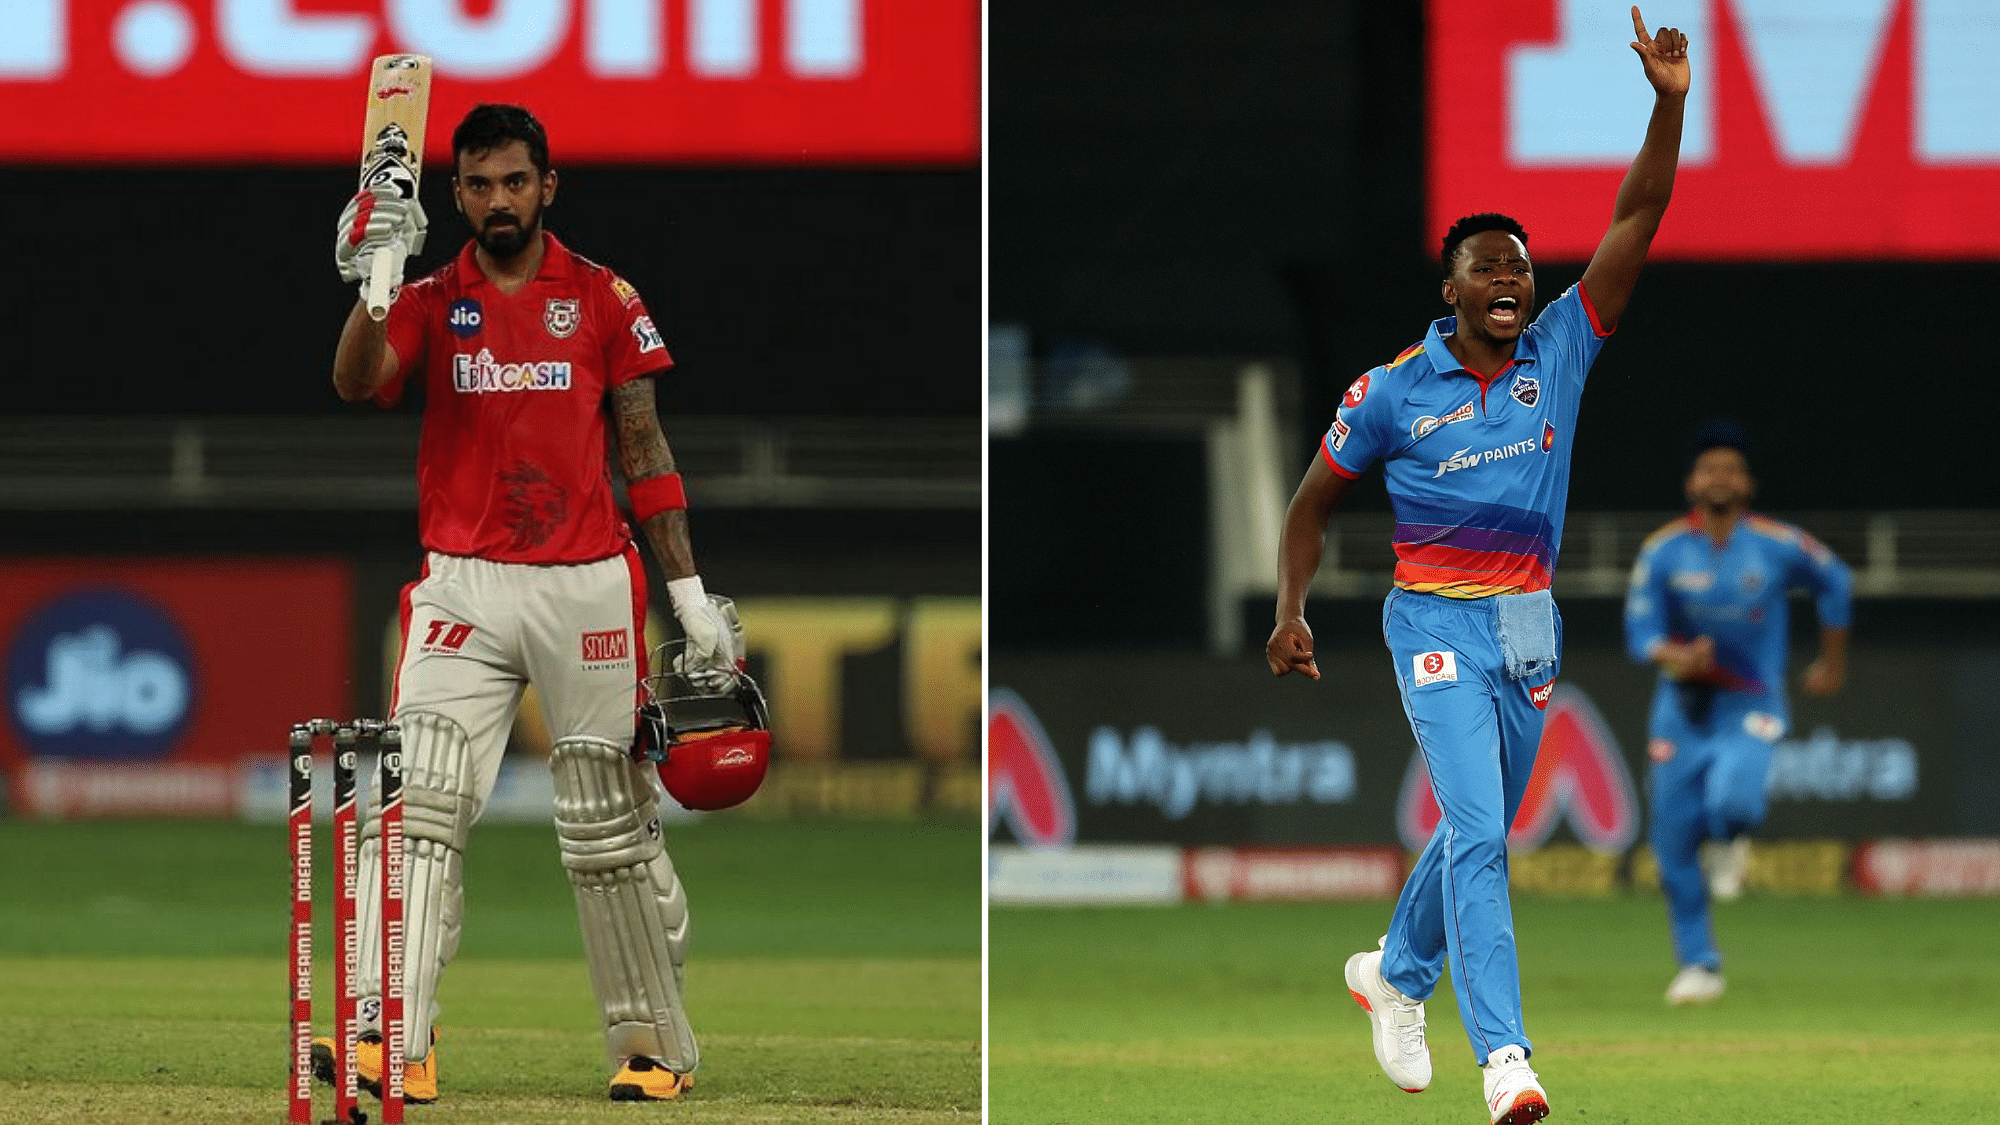 KL Rahul holds the Orange Cap with 313 runs while Kagiso Rabada leads the Purple Cap race with 12 wickets